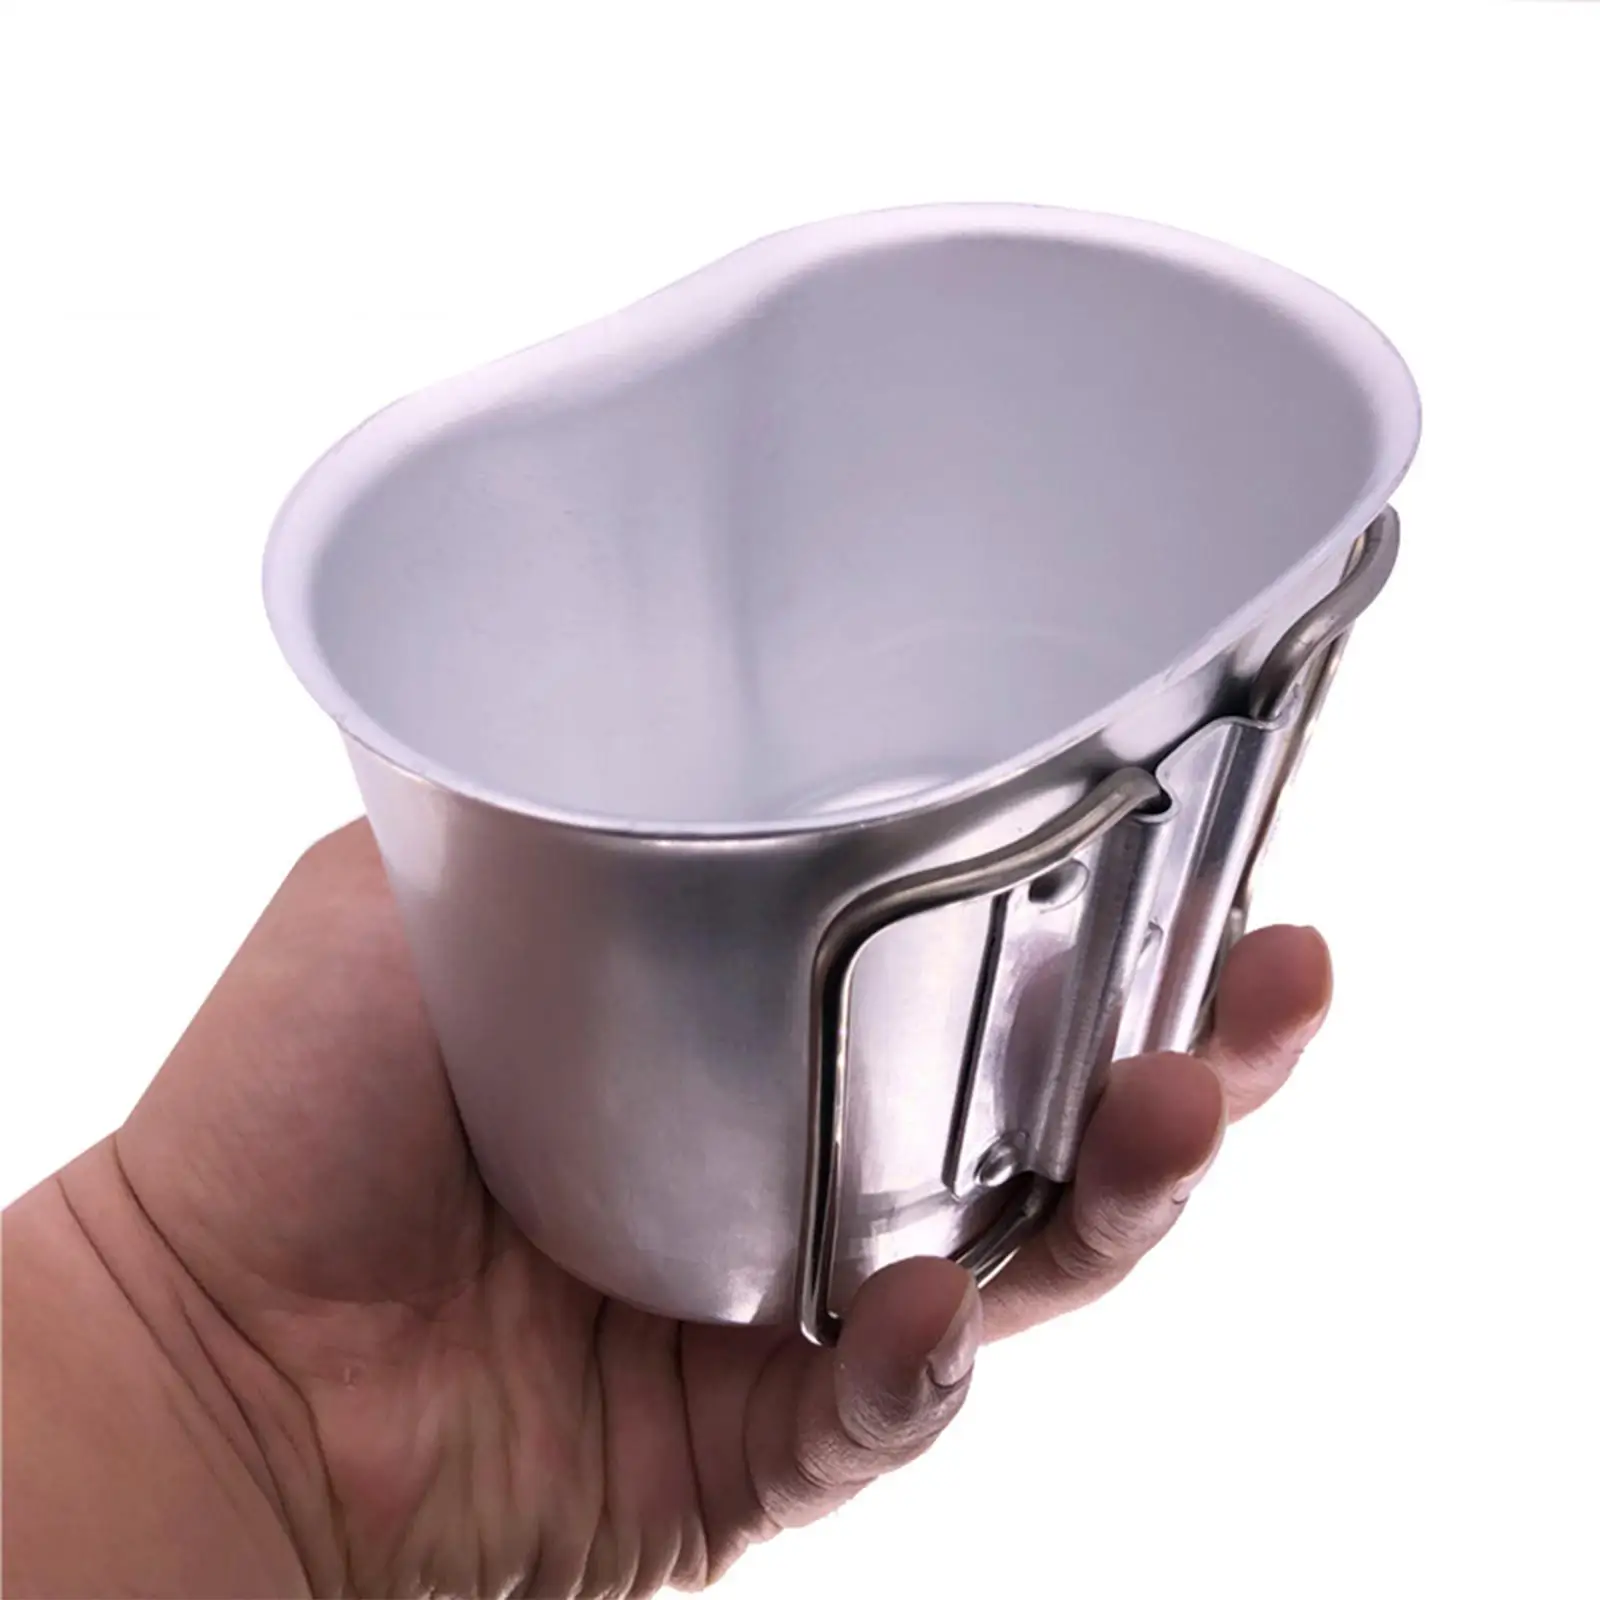 Multifunctional Camping Cookware Cup Lunchbox with Handle Alloy for Hiking